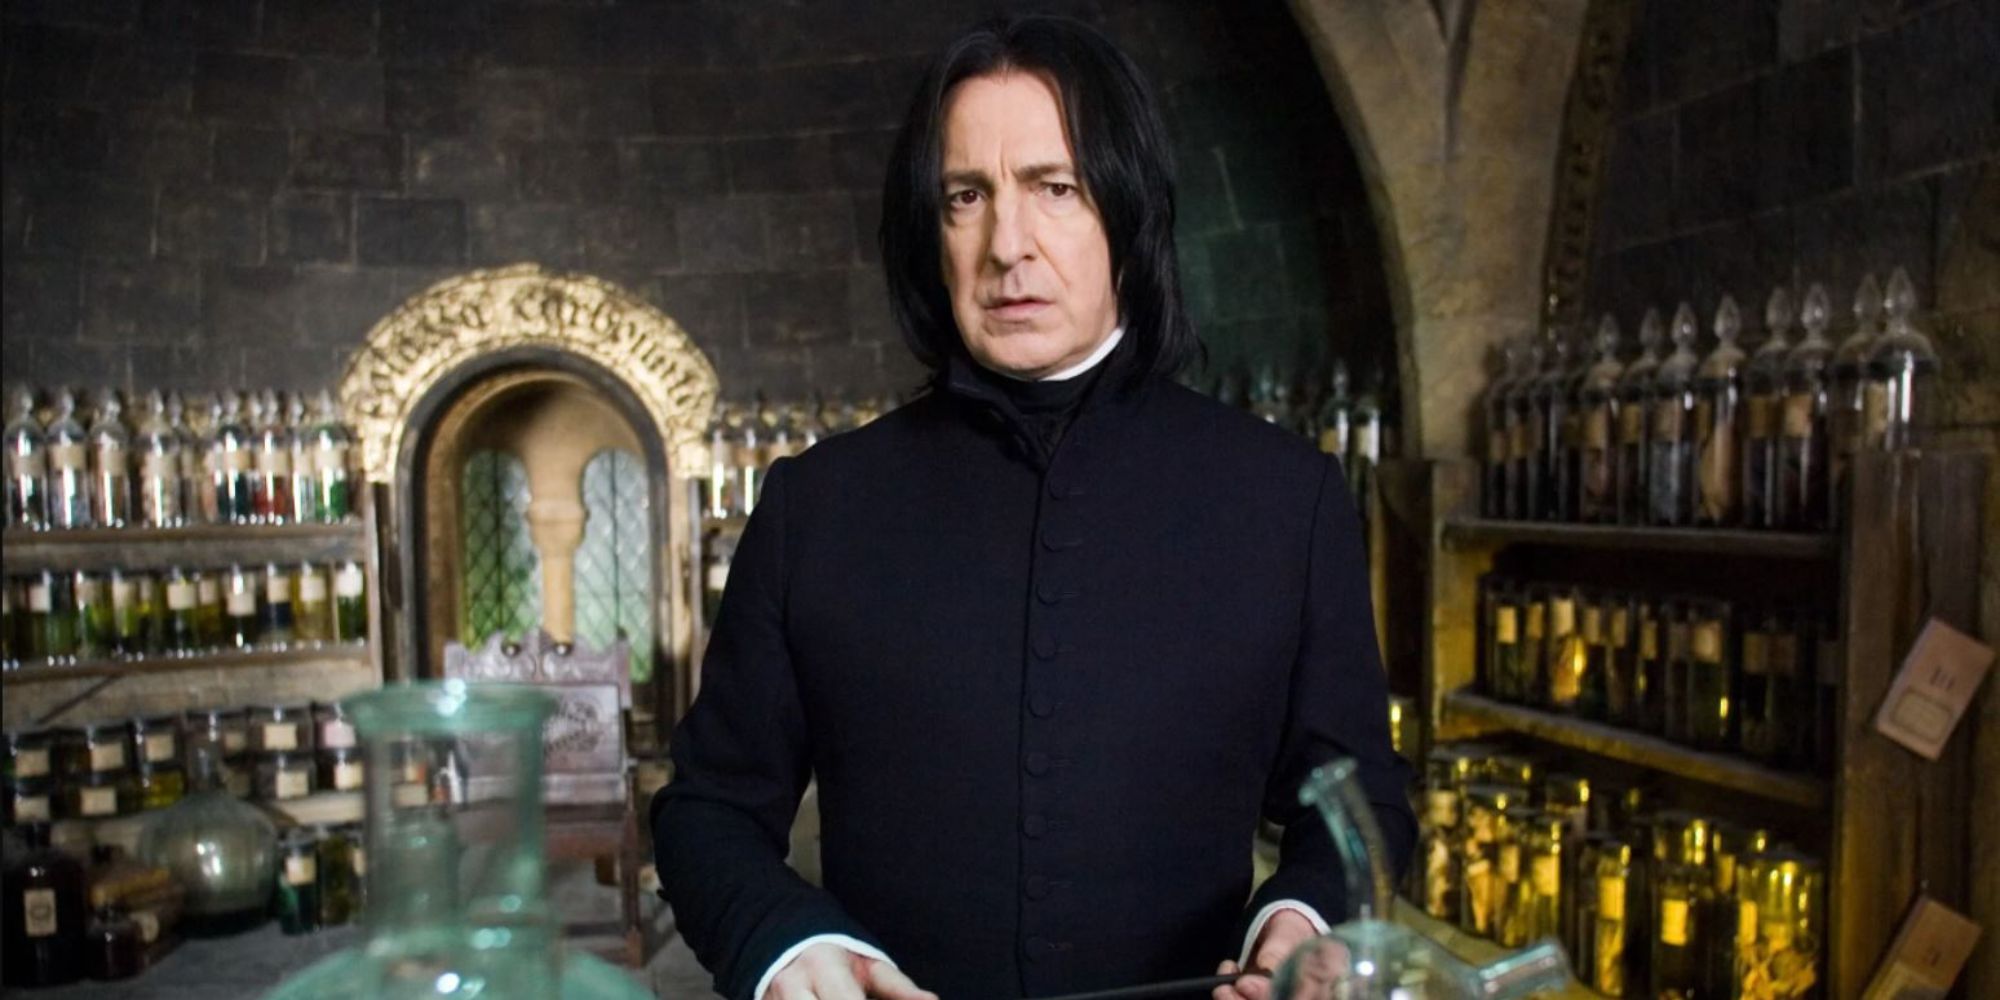 Severus Snape stands impassively in his room full of potions